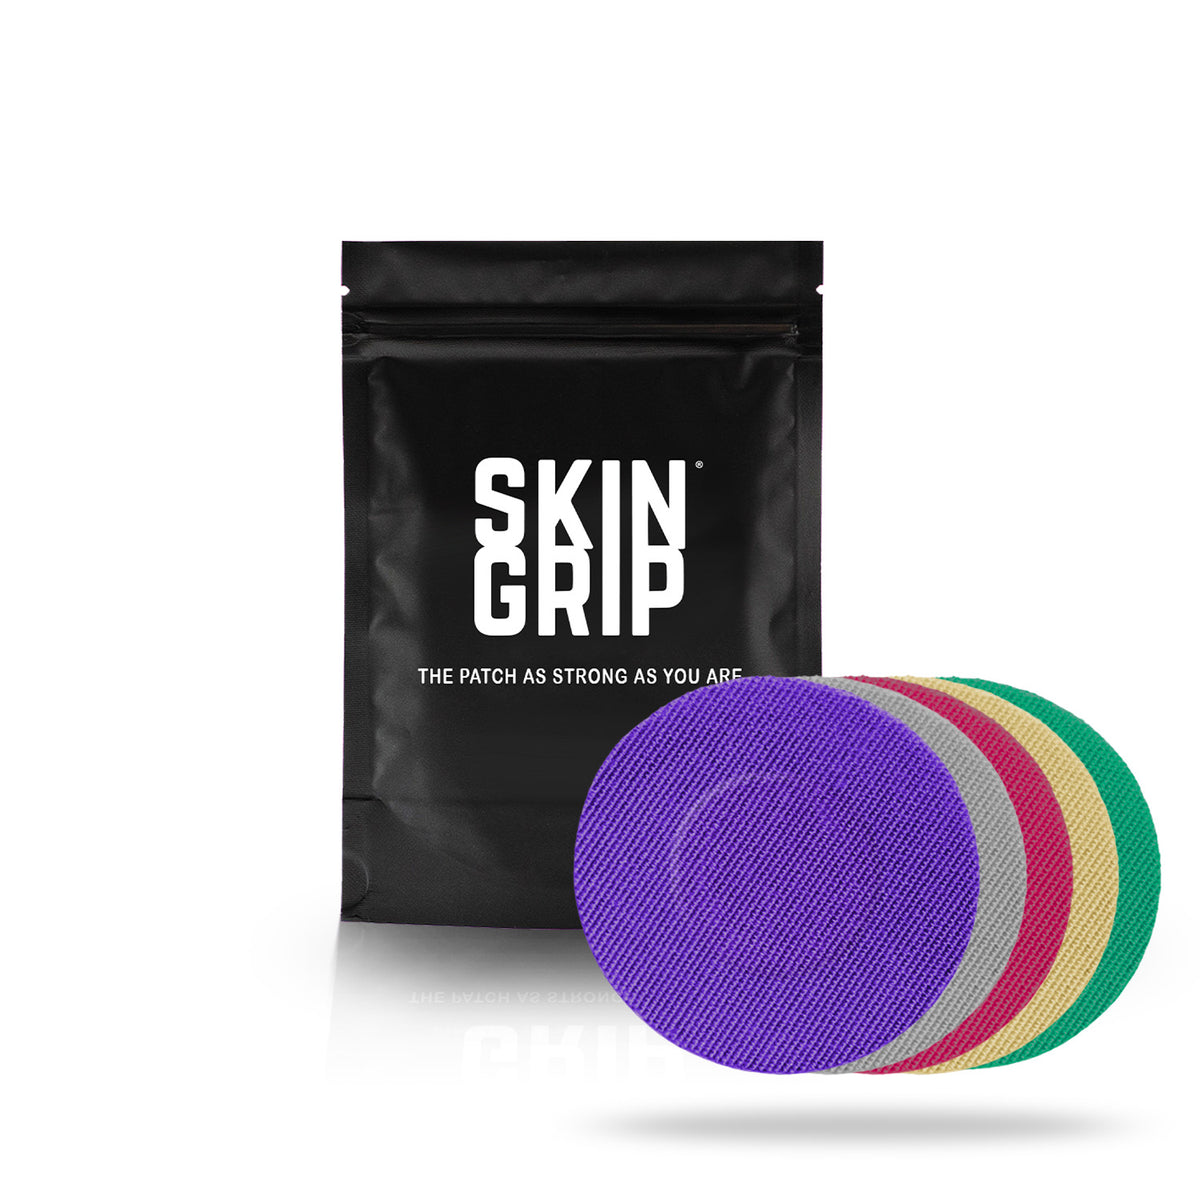 Skin Grip Original - Freestyle Libre 2 Adhesive Patches - 20 Pack